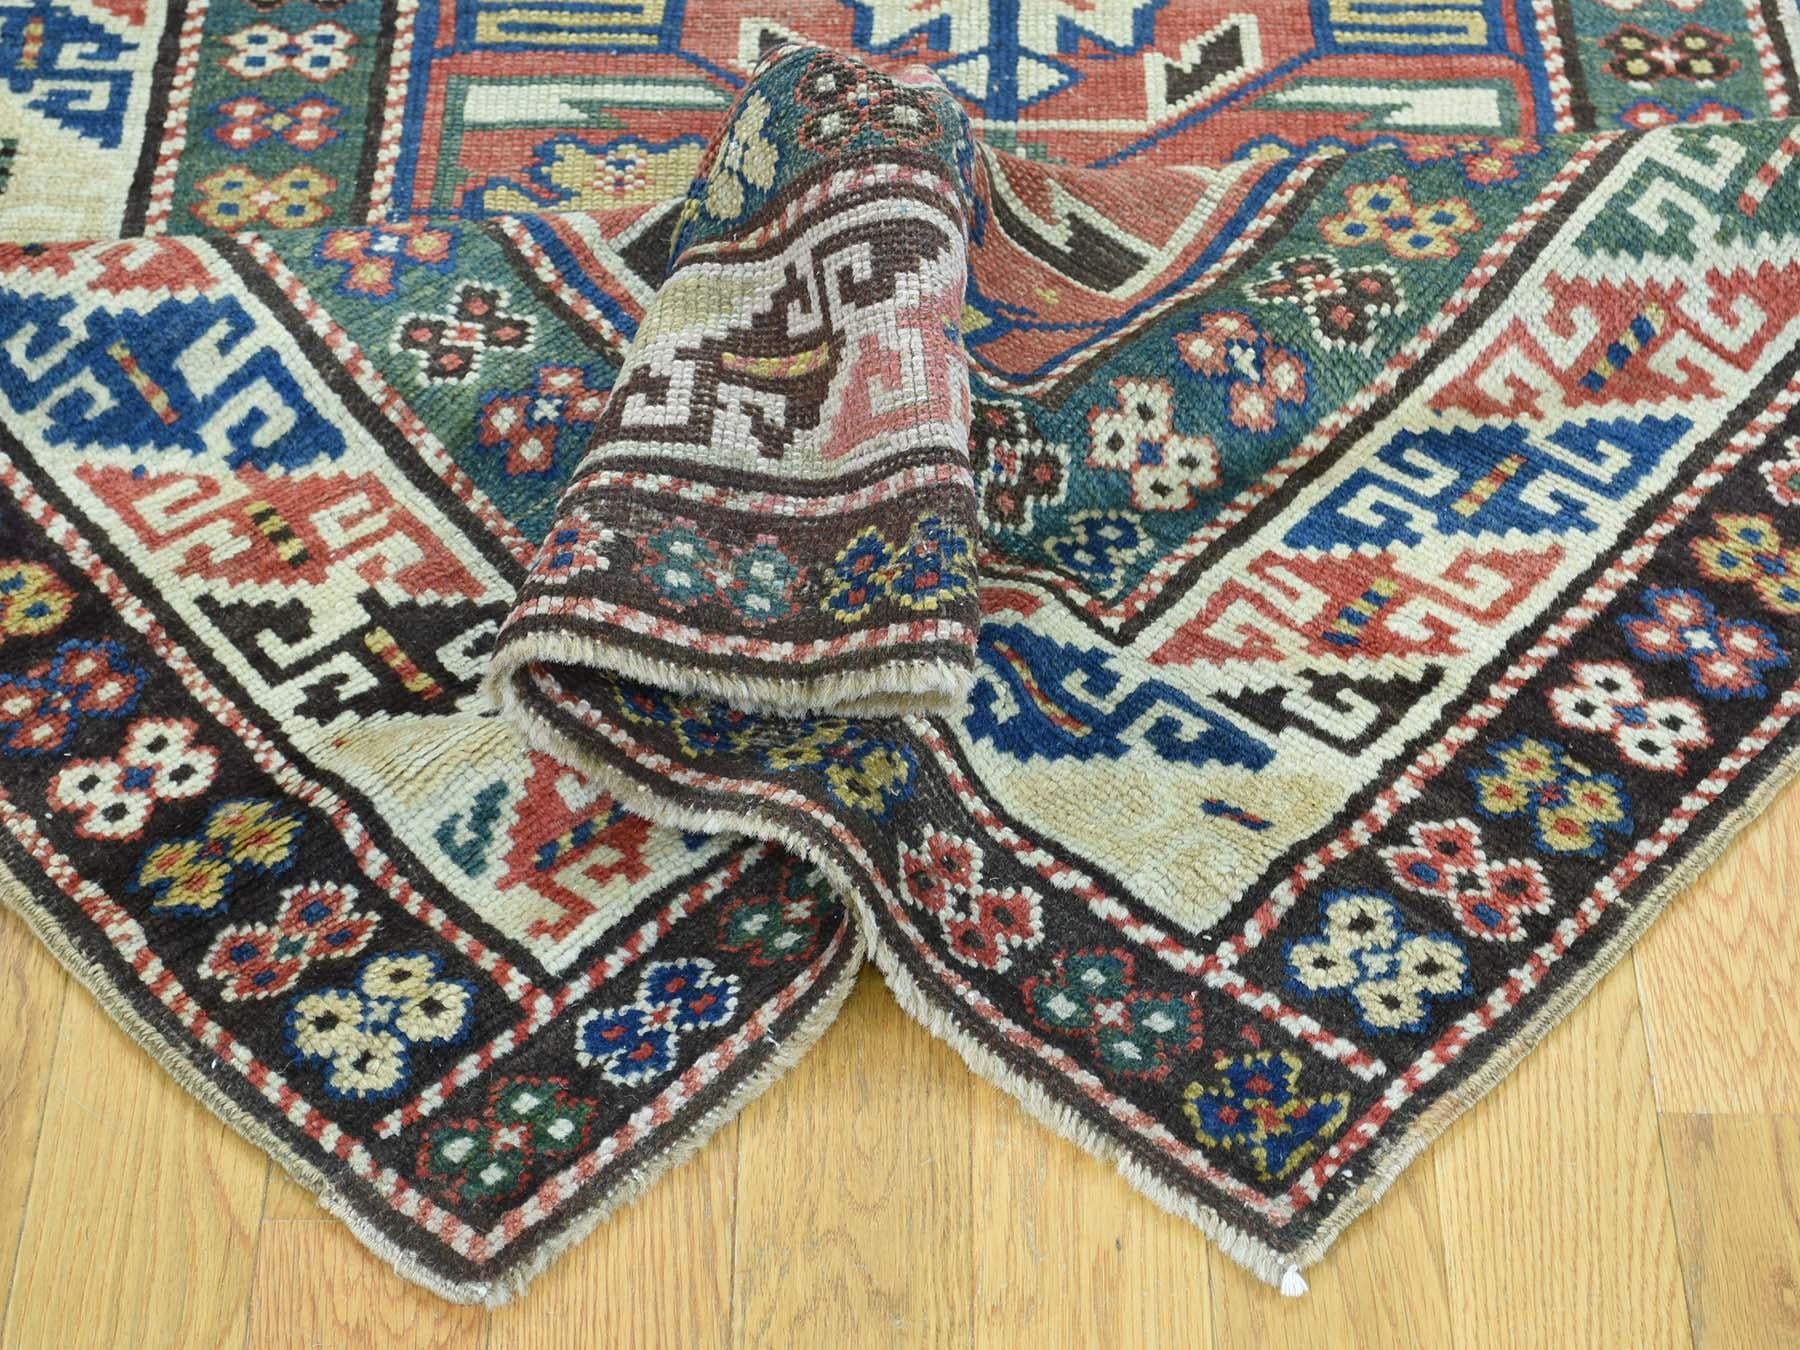 This is a genuine hand knotted oriental rug. It is not hand tufted or machine made rug. Our entire inventory is made of either hand knotted or handwoven rugs.

Bring life to your home with this admirable antique carpet. This handcrafted Kazak